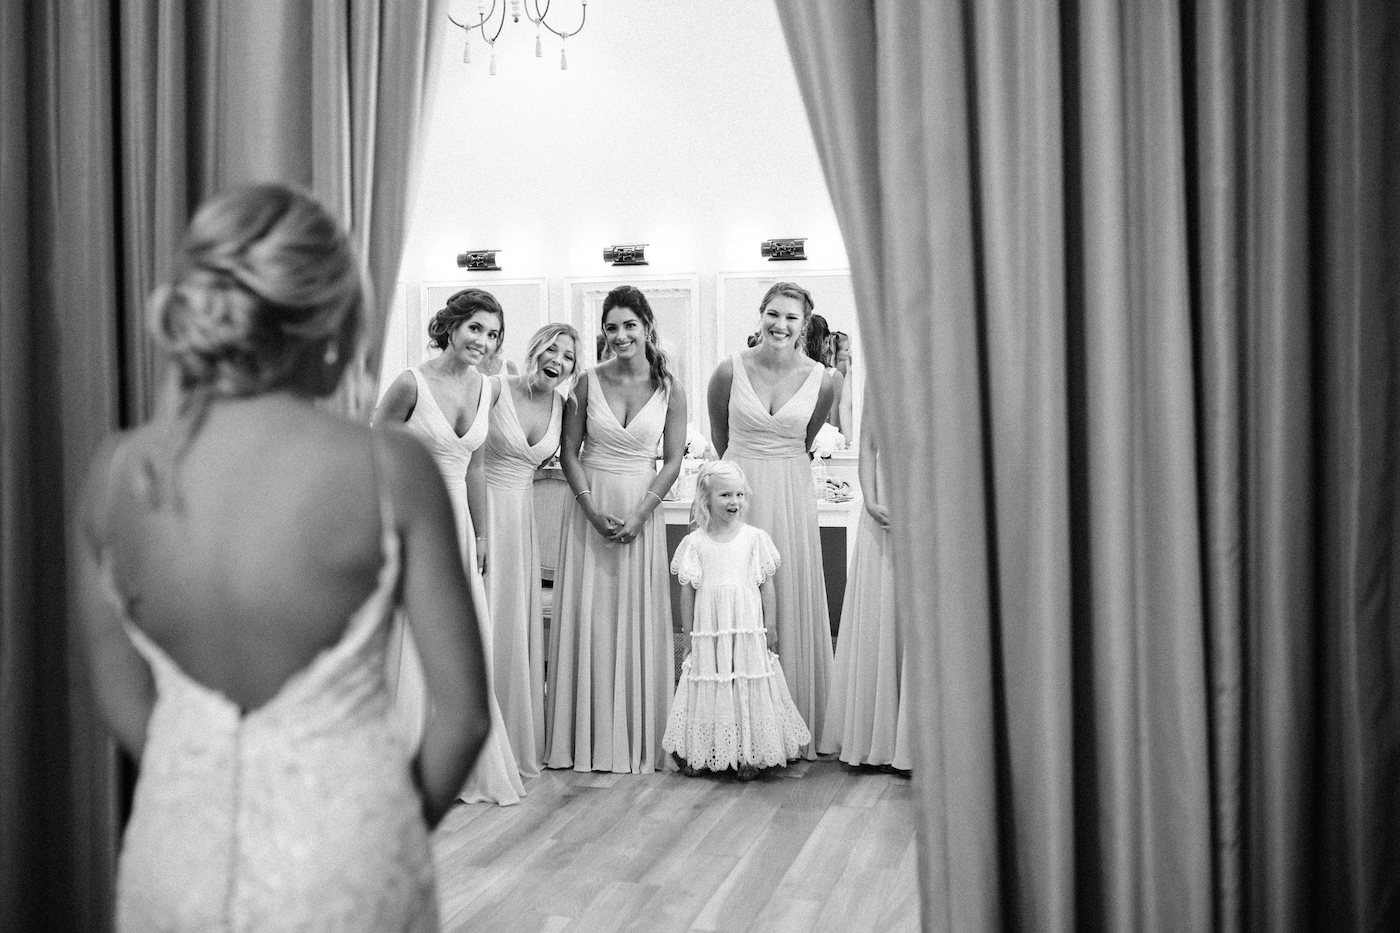 Bride and Bridesmaids First Look | Bride Wedding Gown Reveal with Bridesmaids | Black and White Wedding Photography